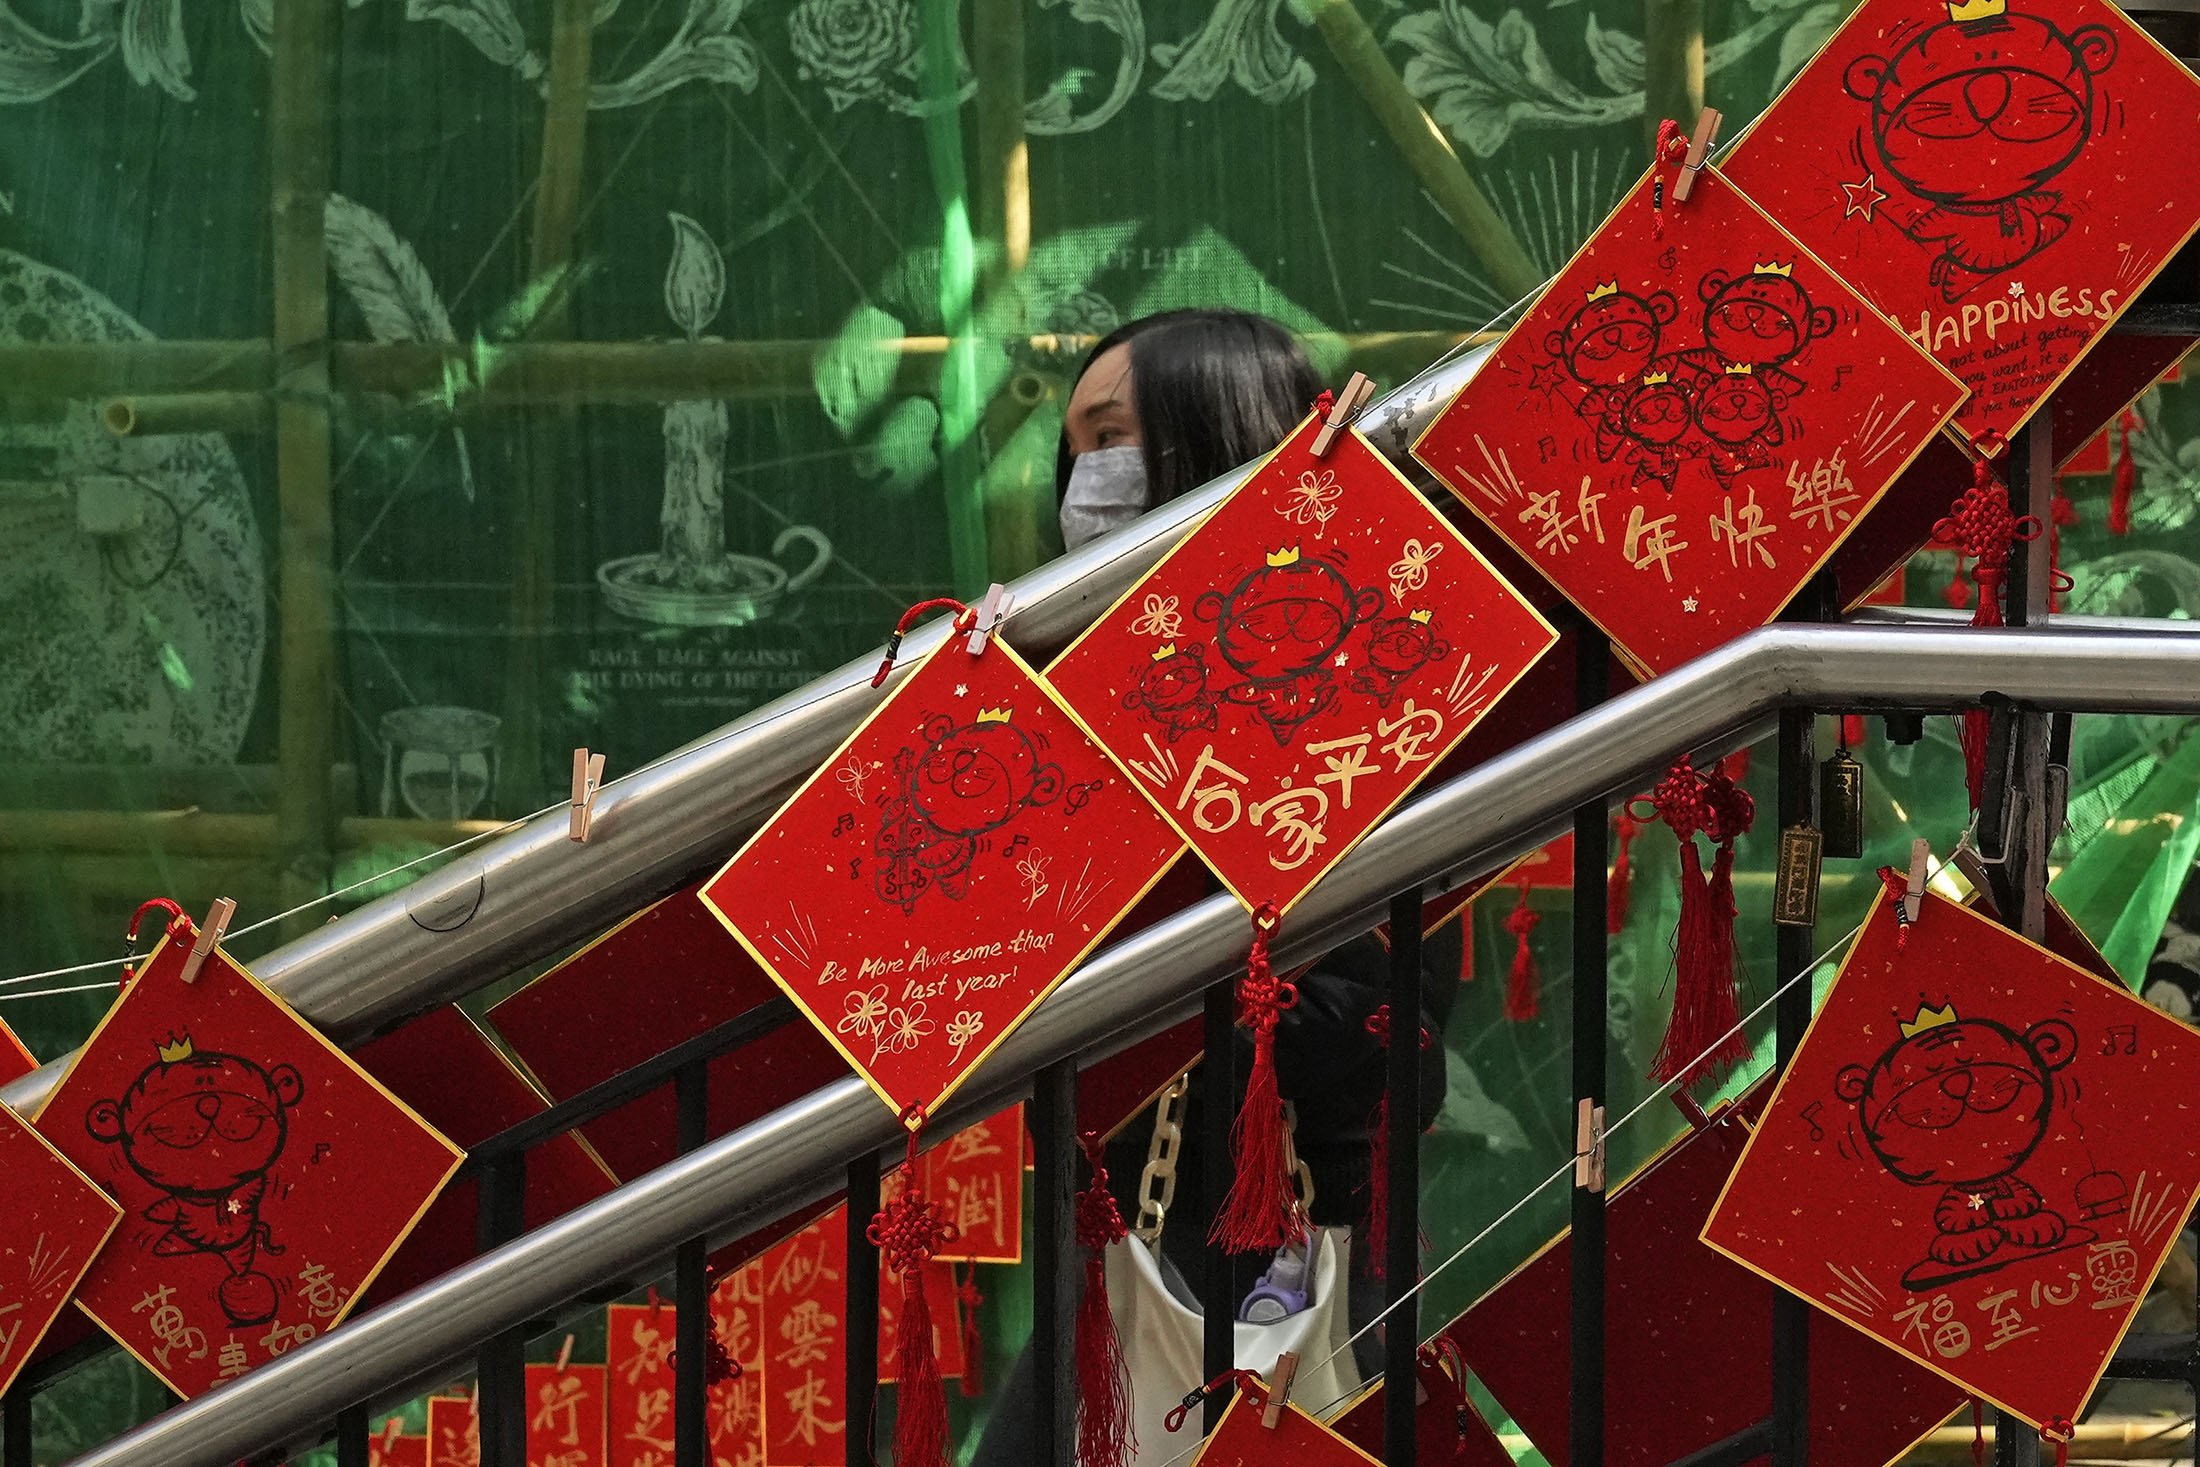 Hong Kong's best Chinese New Year decorations and displays in 2024